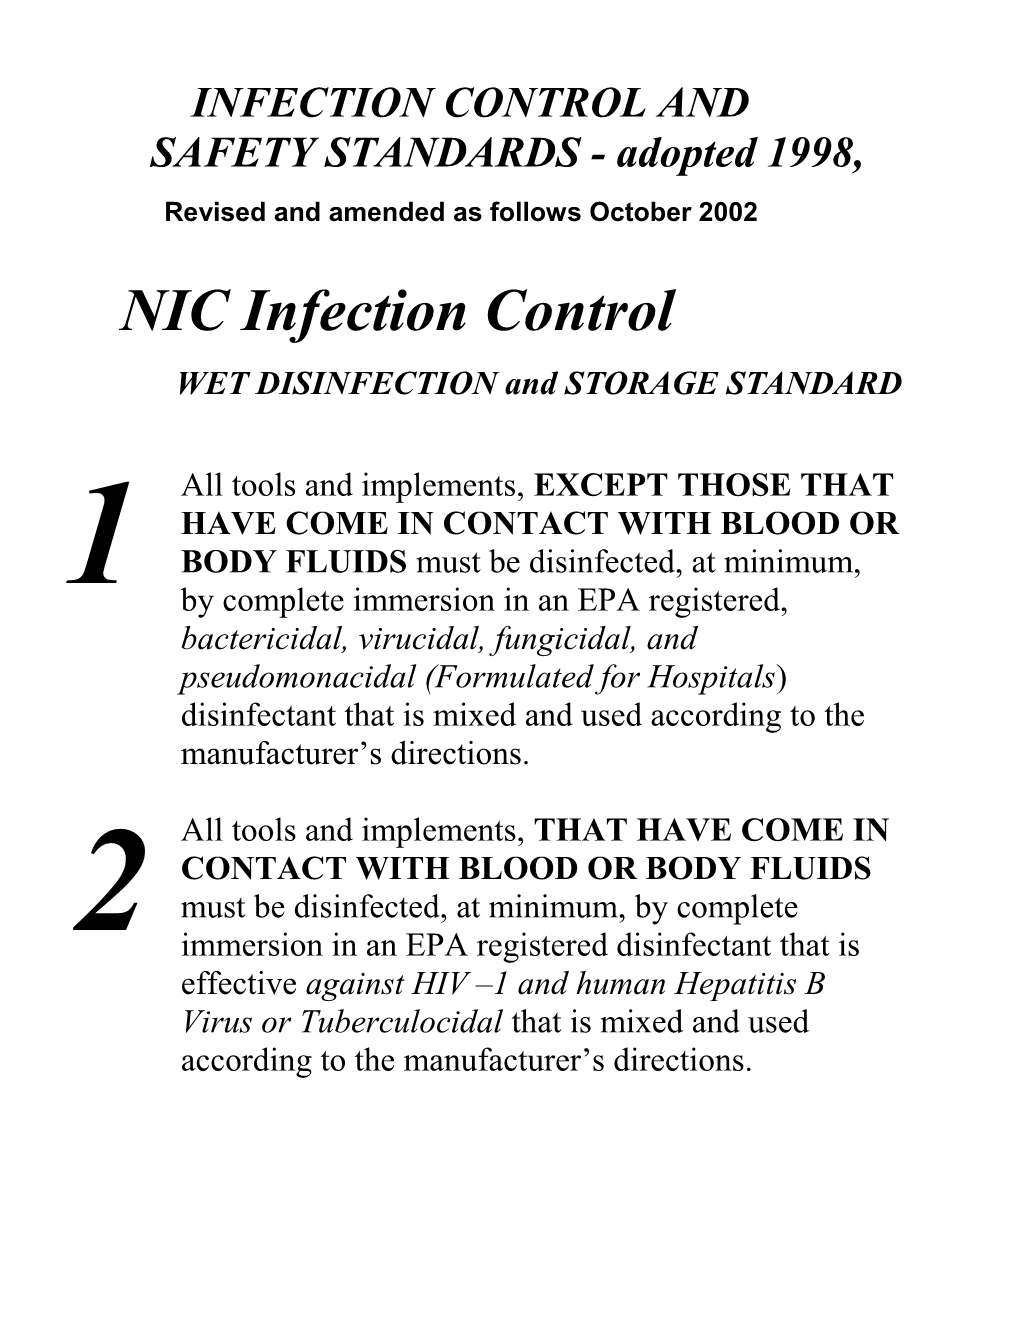 INFECTION CONTROL and SAFETY STANDARDS - Adopted 1998